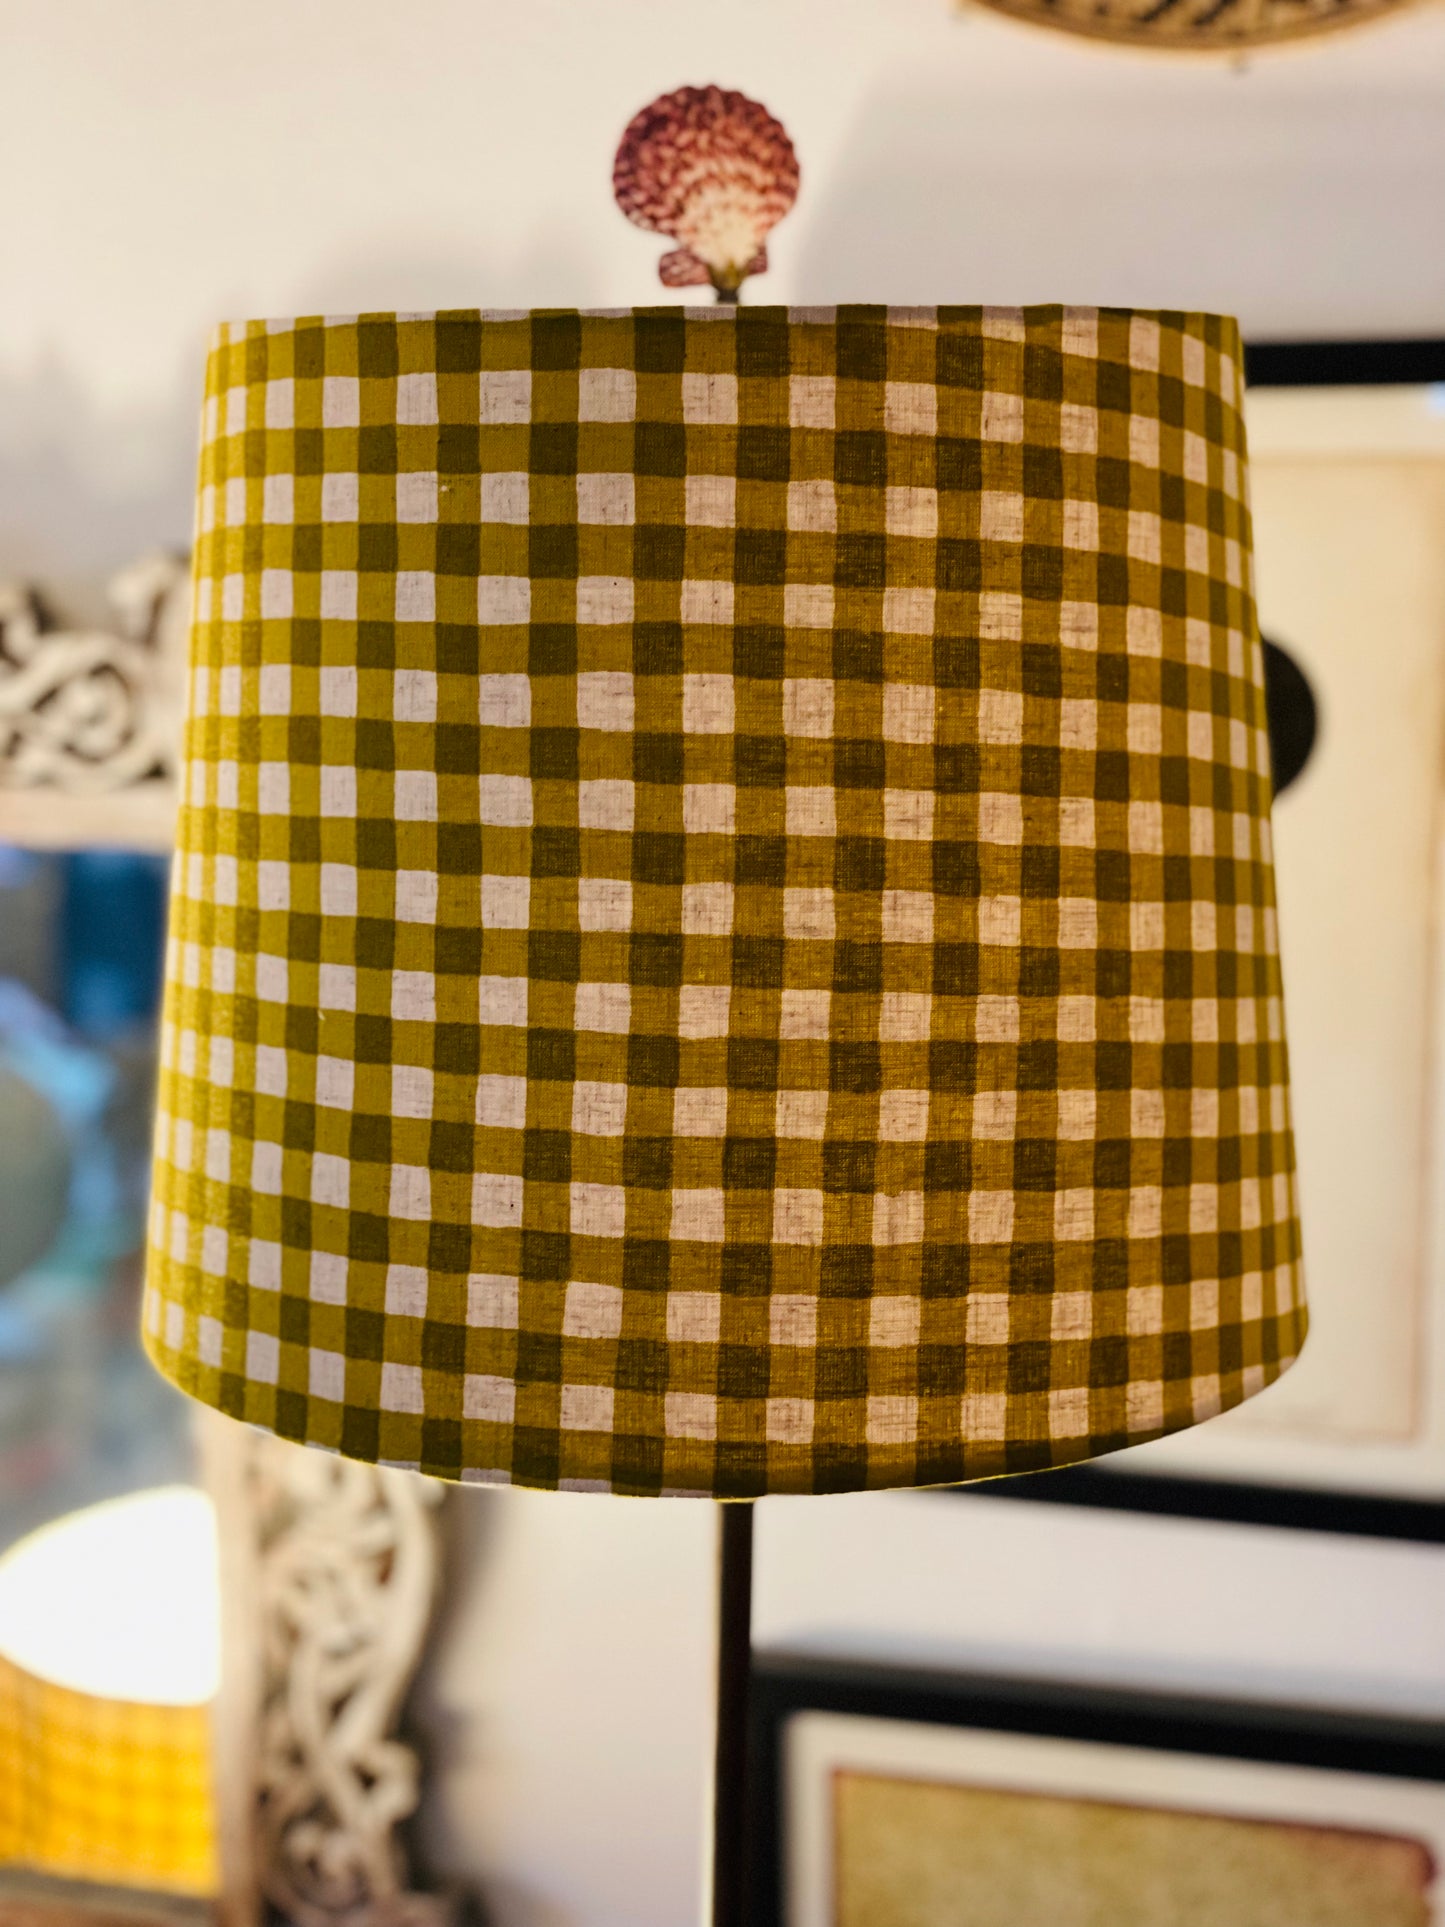 Medium Empire Lampshade. Yellow-Green Gingham Cotton-Linen from Japan.